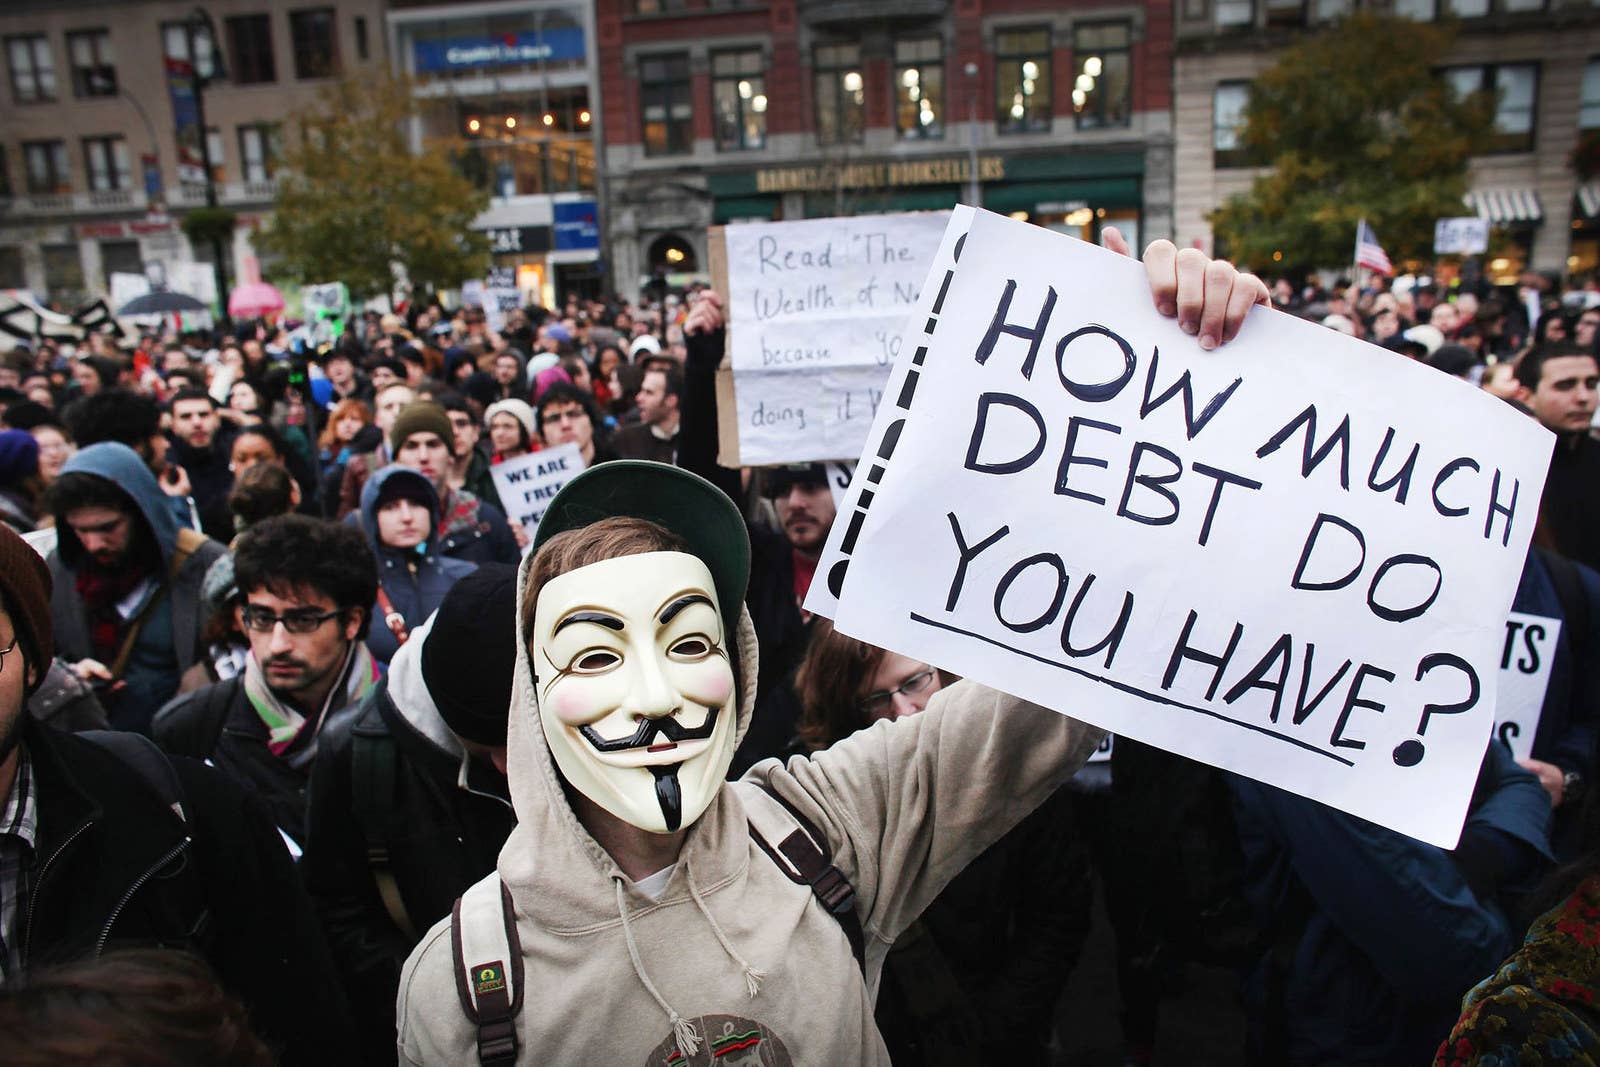 A large gathering of protesters affiliated with the Occupy Wall Street movement attend a rally in Union Square on Nov. 17, 2011.